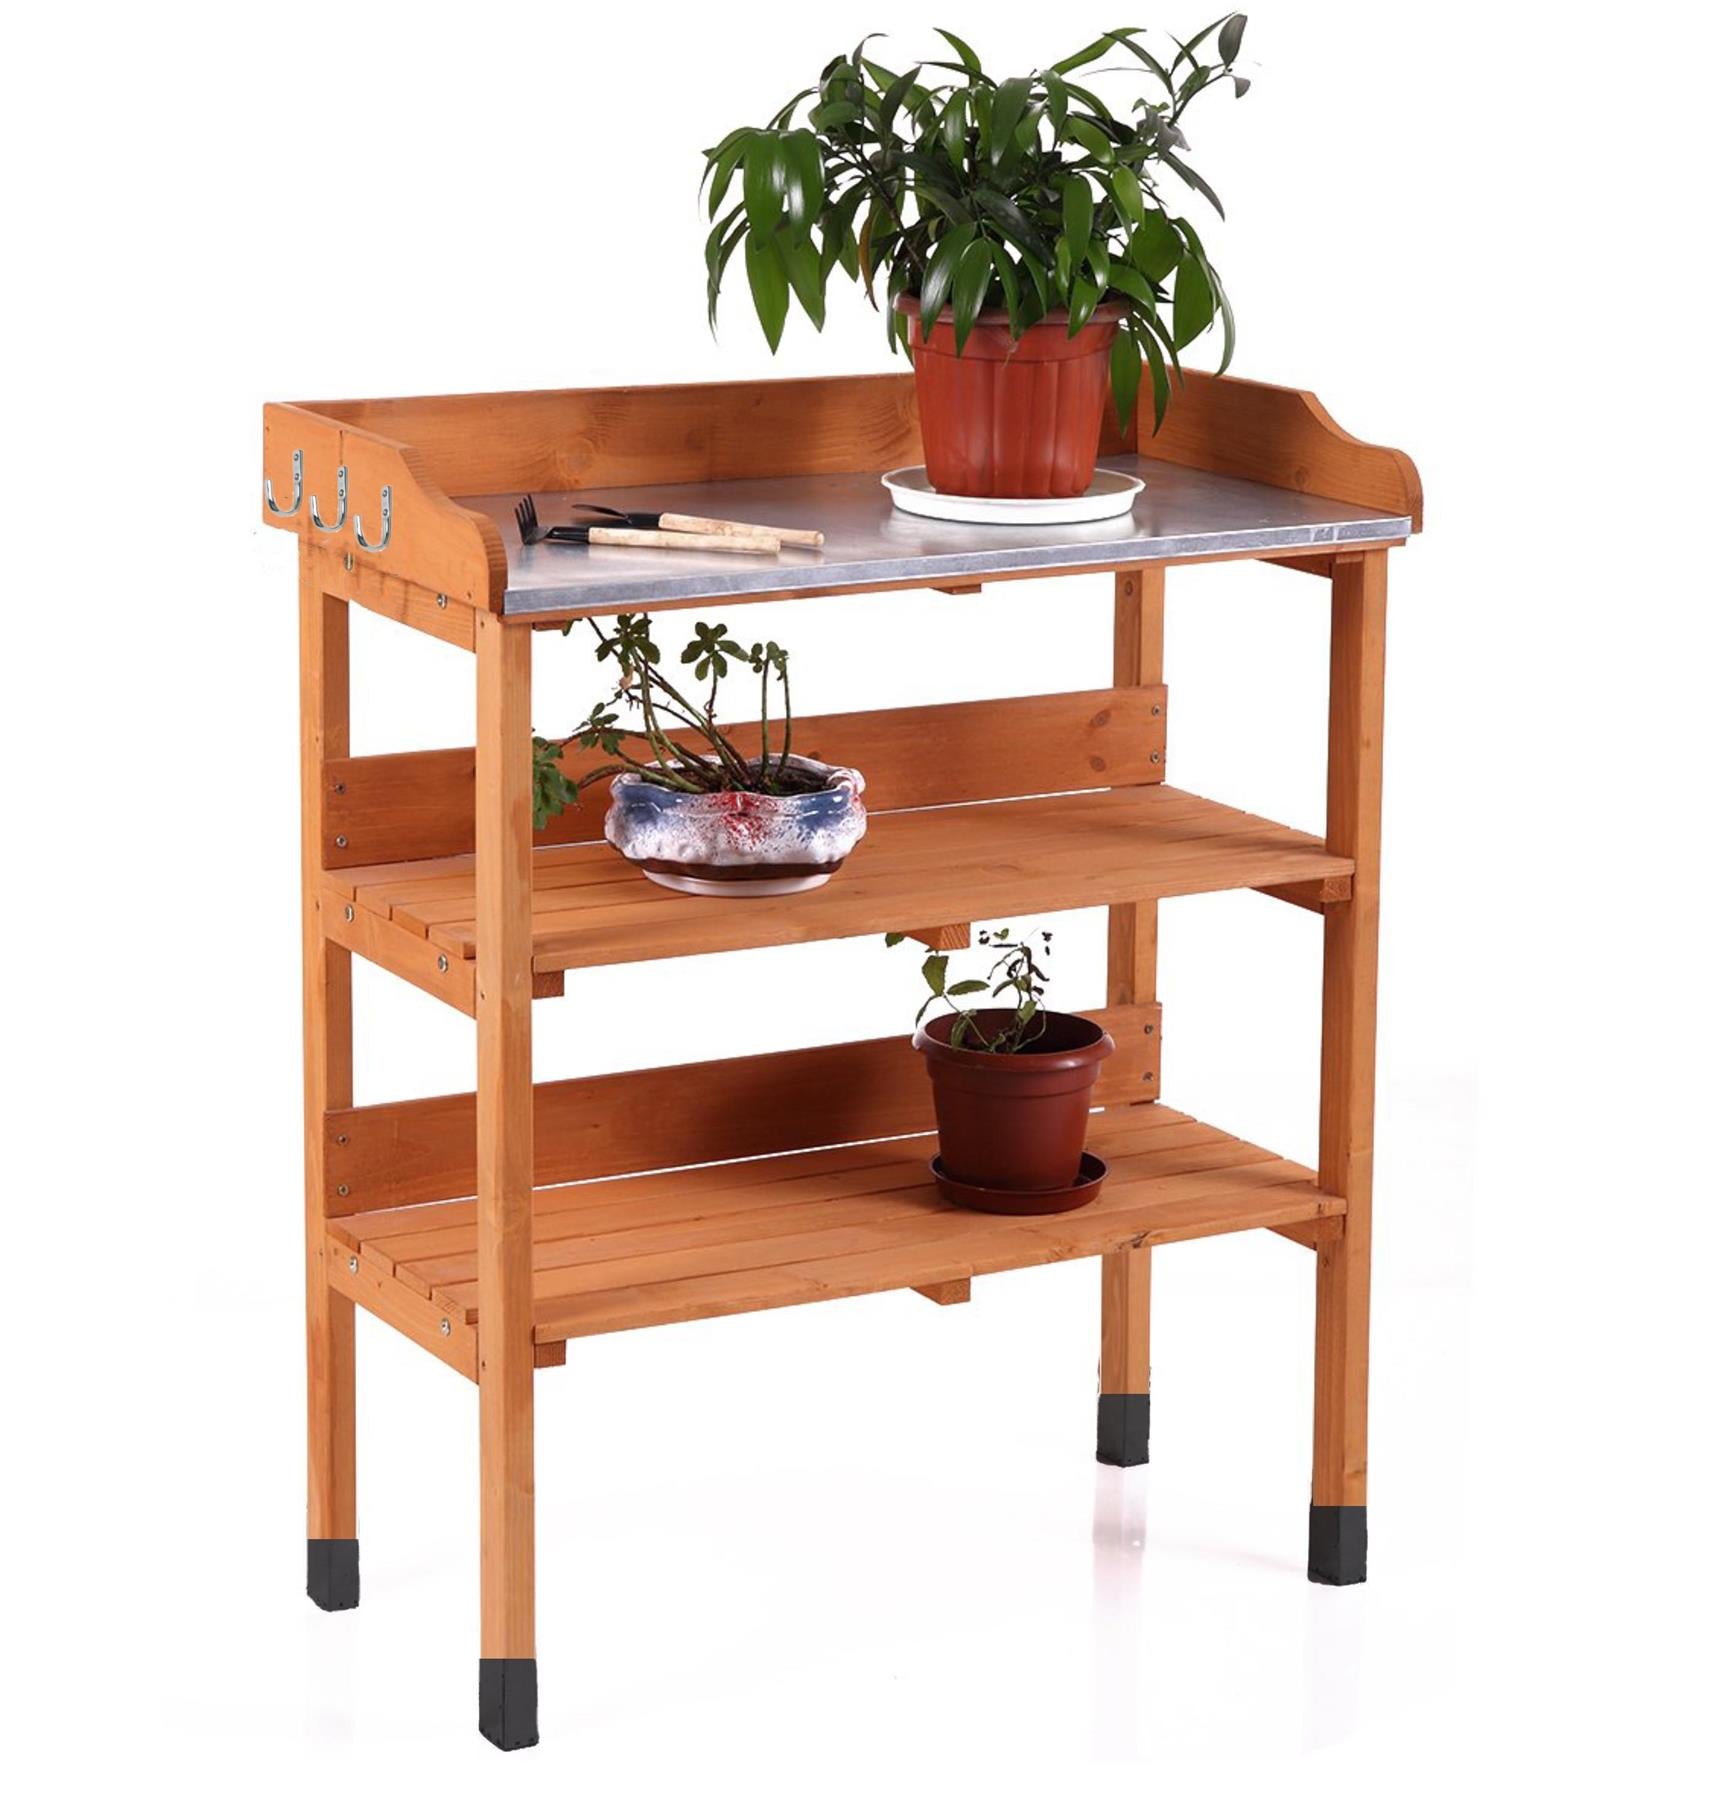 Wooden Practical Planting Table by GEEZY - UKBuyZone